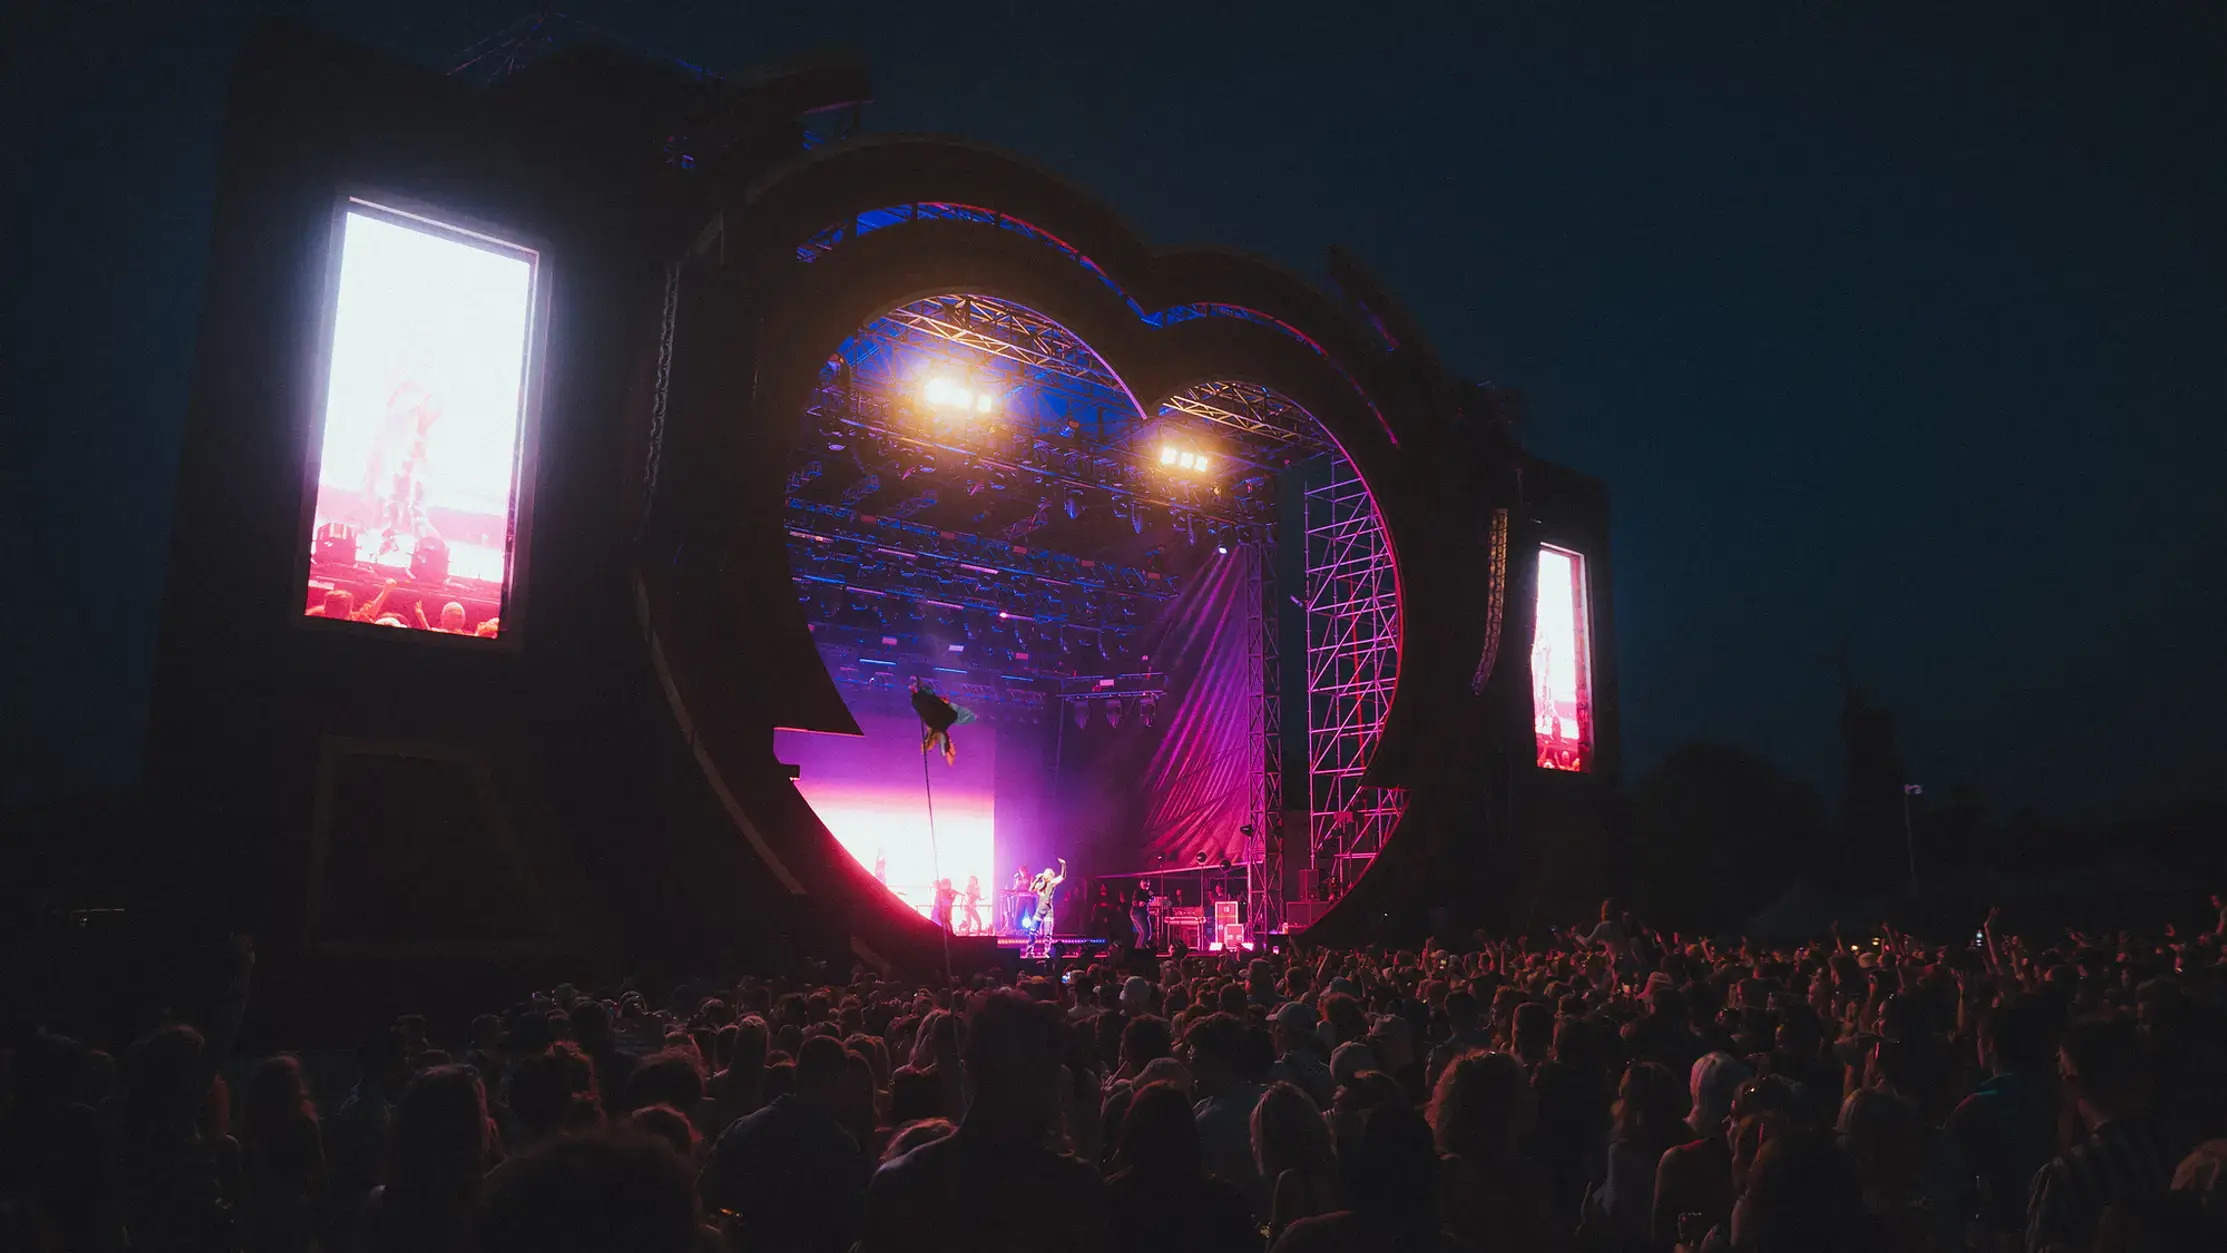 A large crowd gathered at Love Saves The Day music festival during twilight. The stage is set with a unique heart-shaped arch, lit with vibrant stage lights and flanked by large screens displaying performers. The atmosphere is lively with festival-goers enjoying the live music.